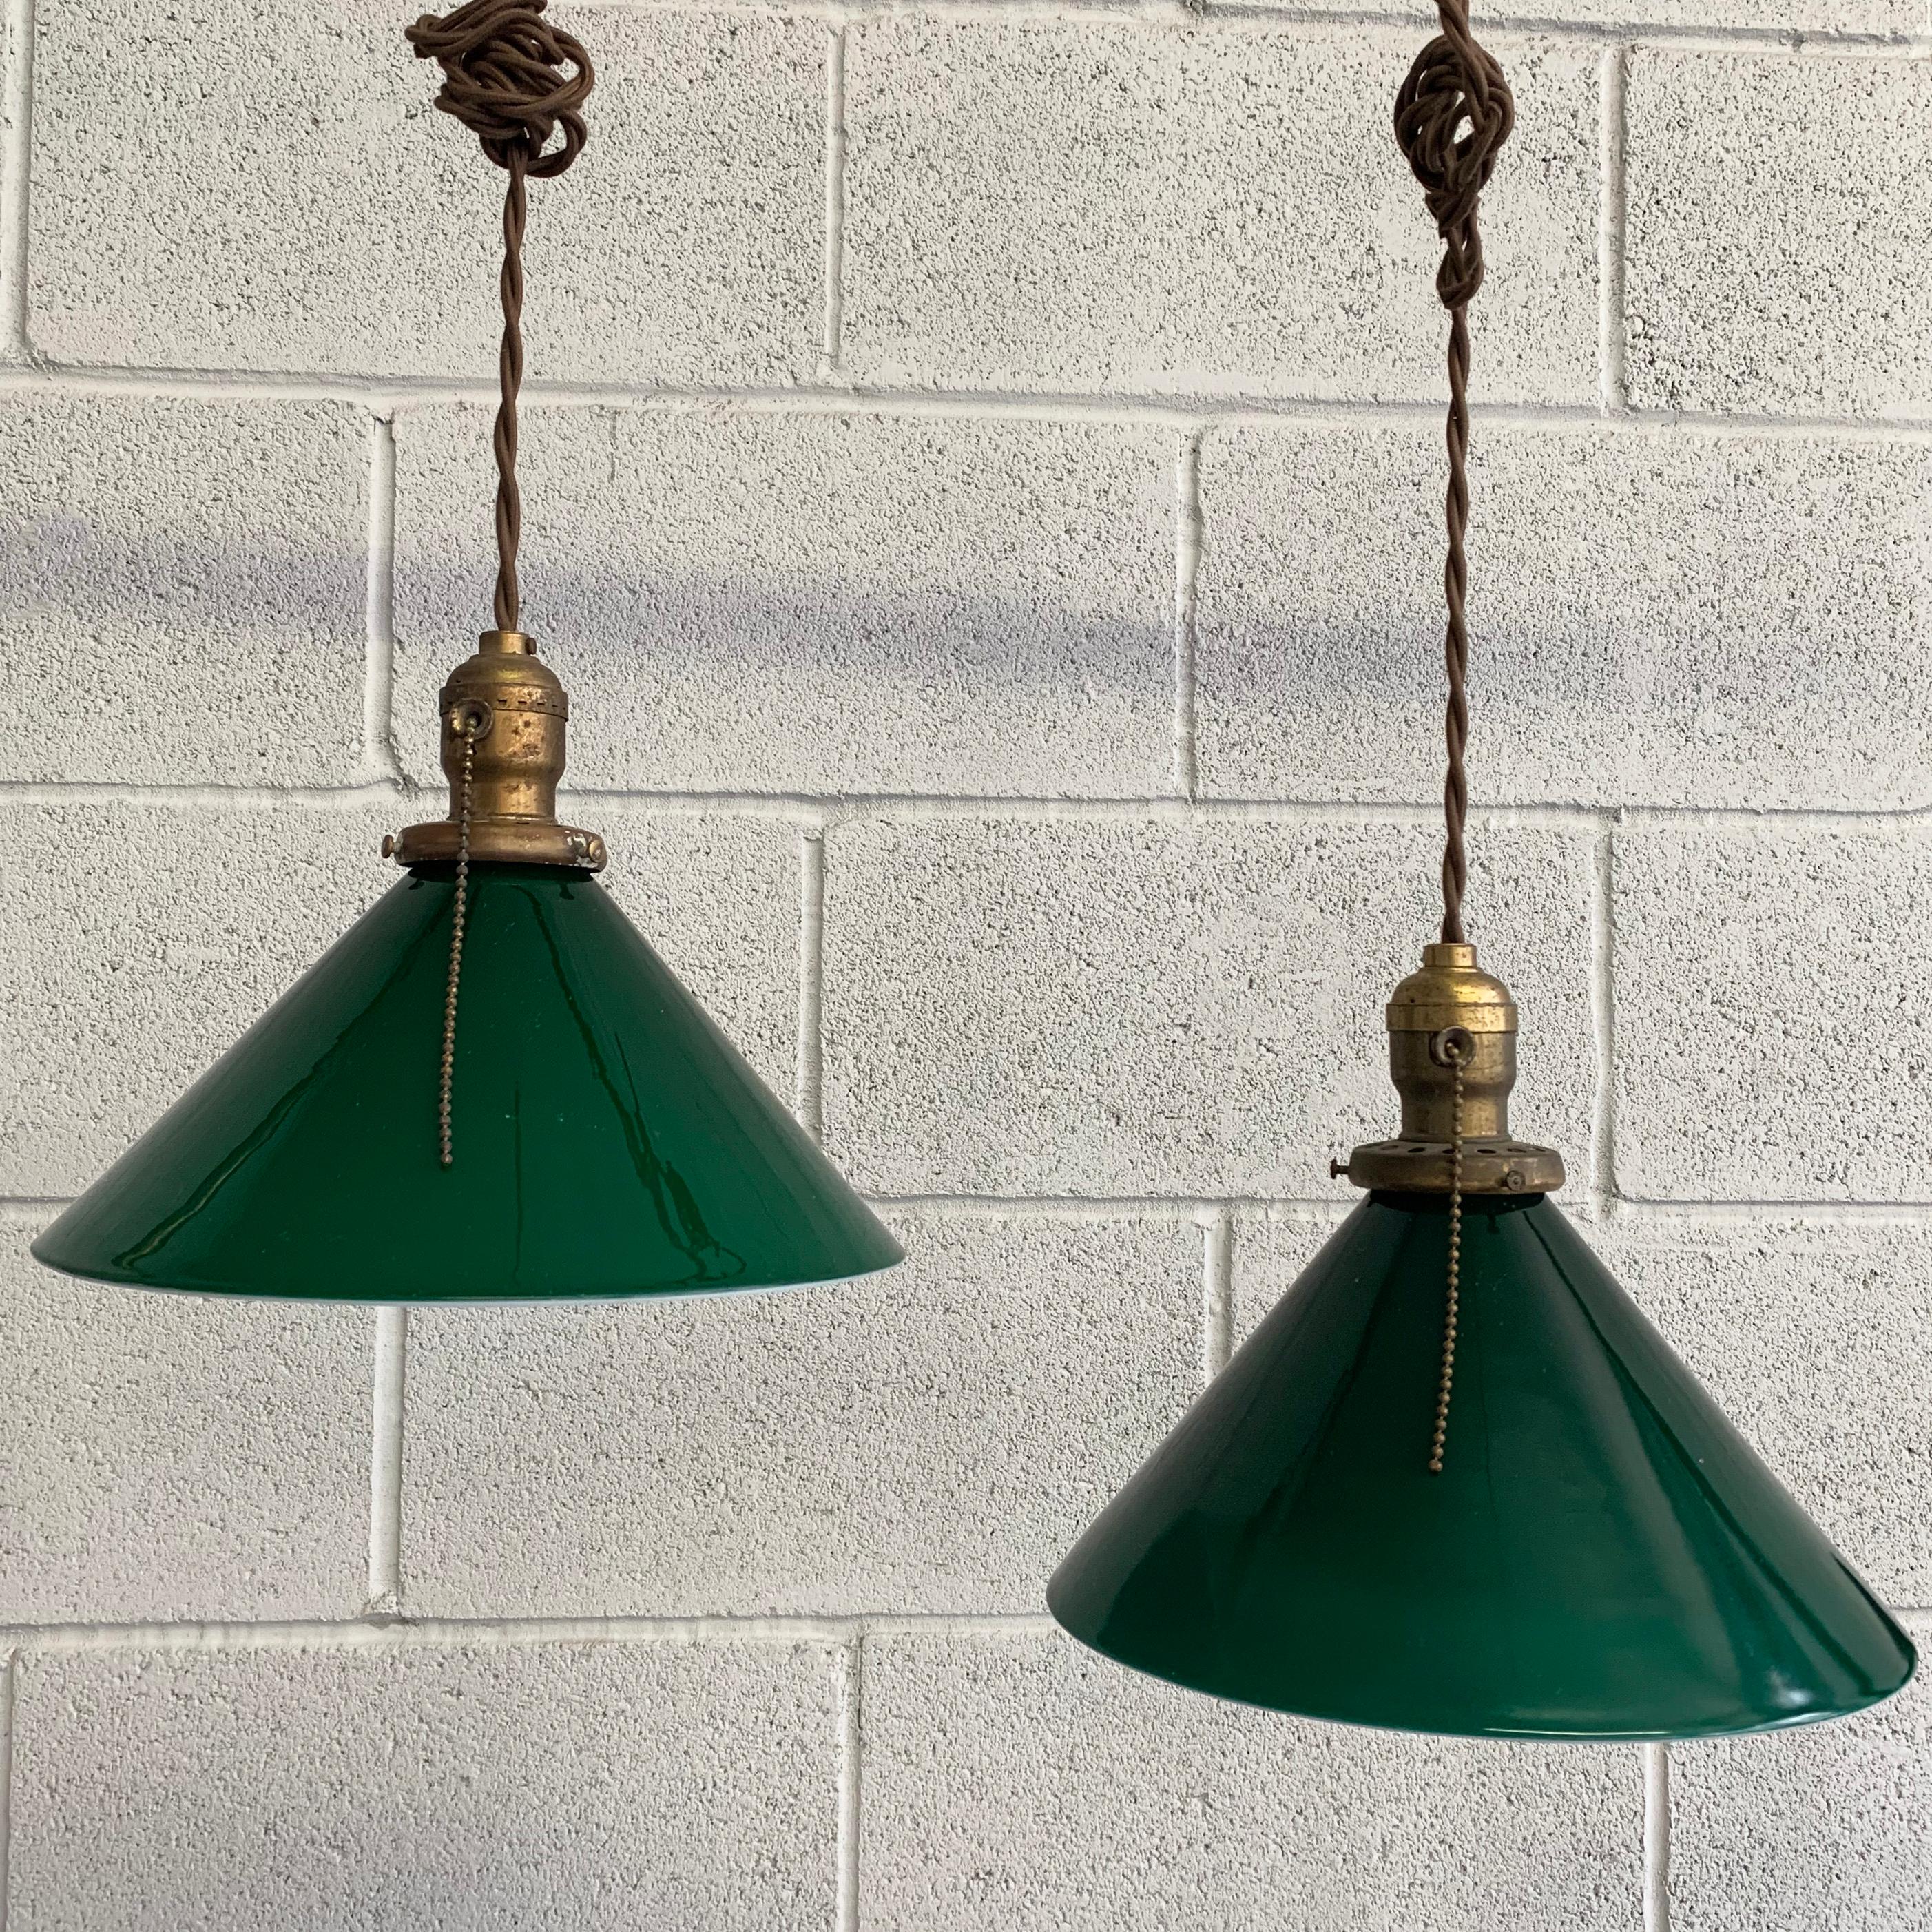 Industrial, early 20th century pendant lights feature green glass cone shades with brass pull chain fitters on 36 inches of braided cloth cord.